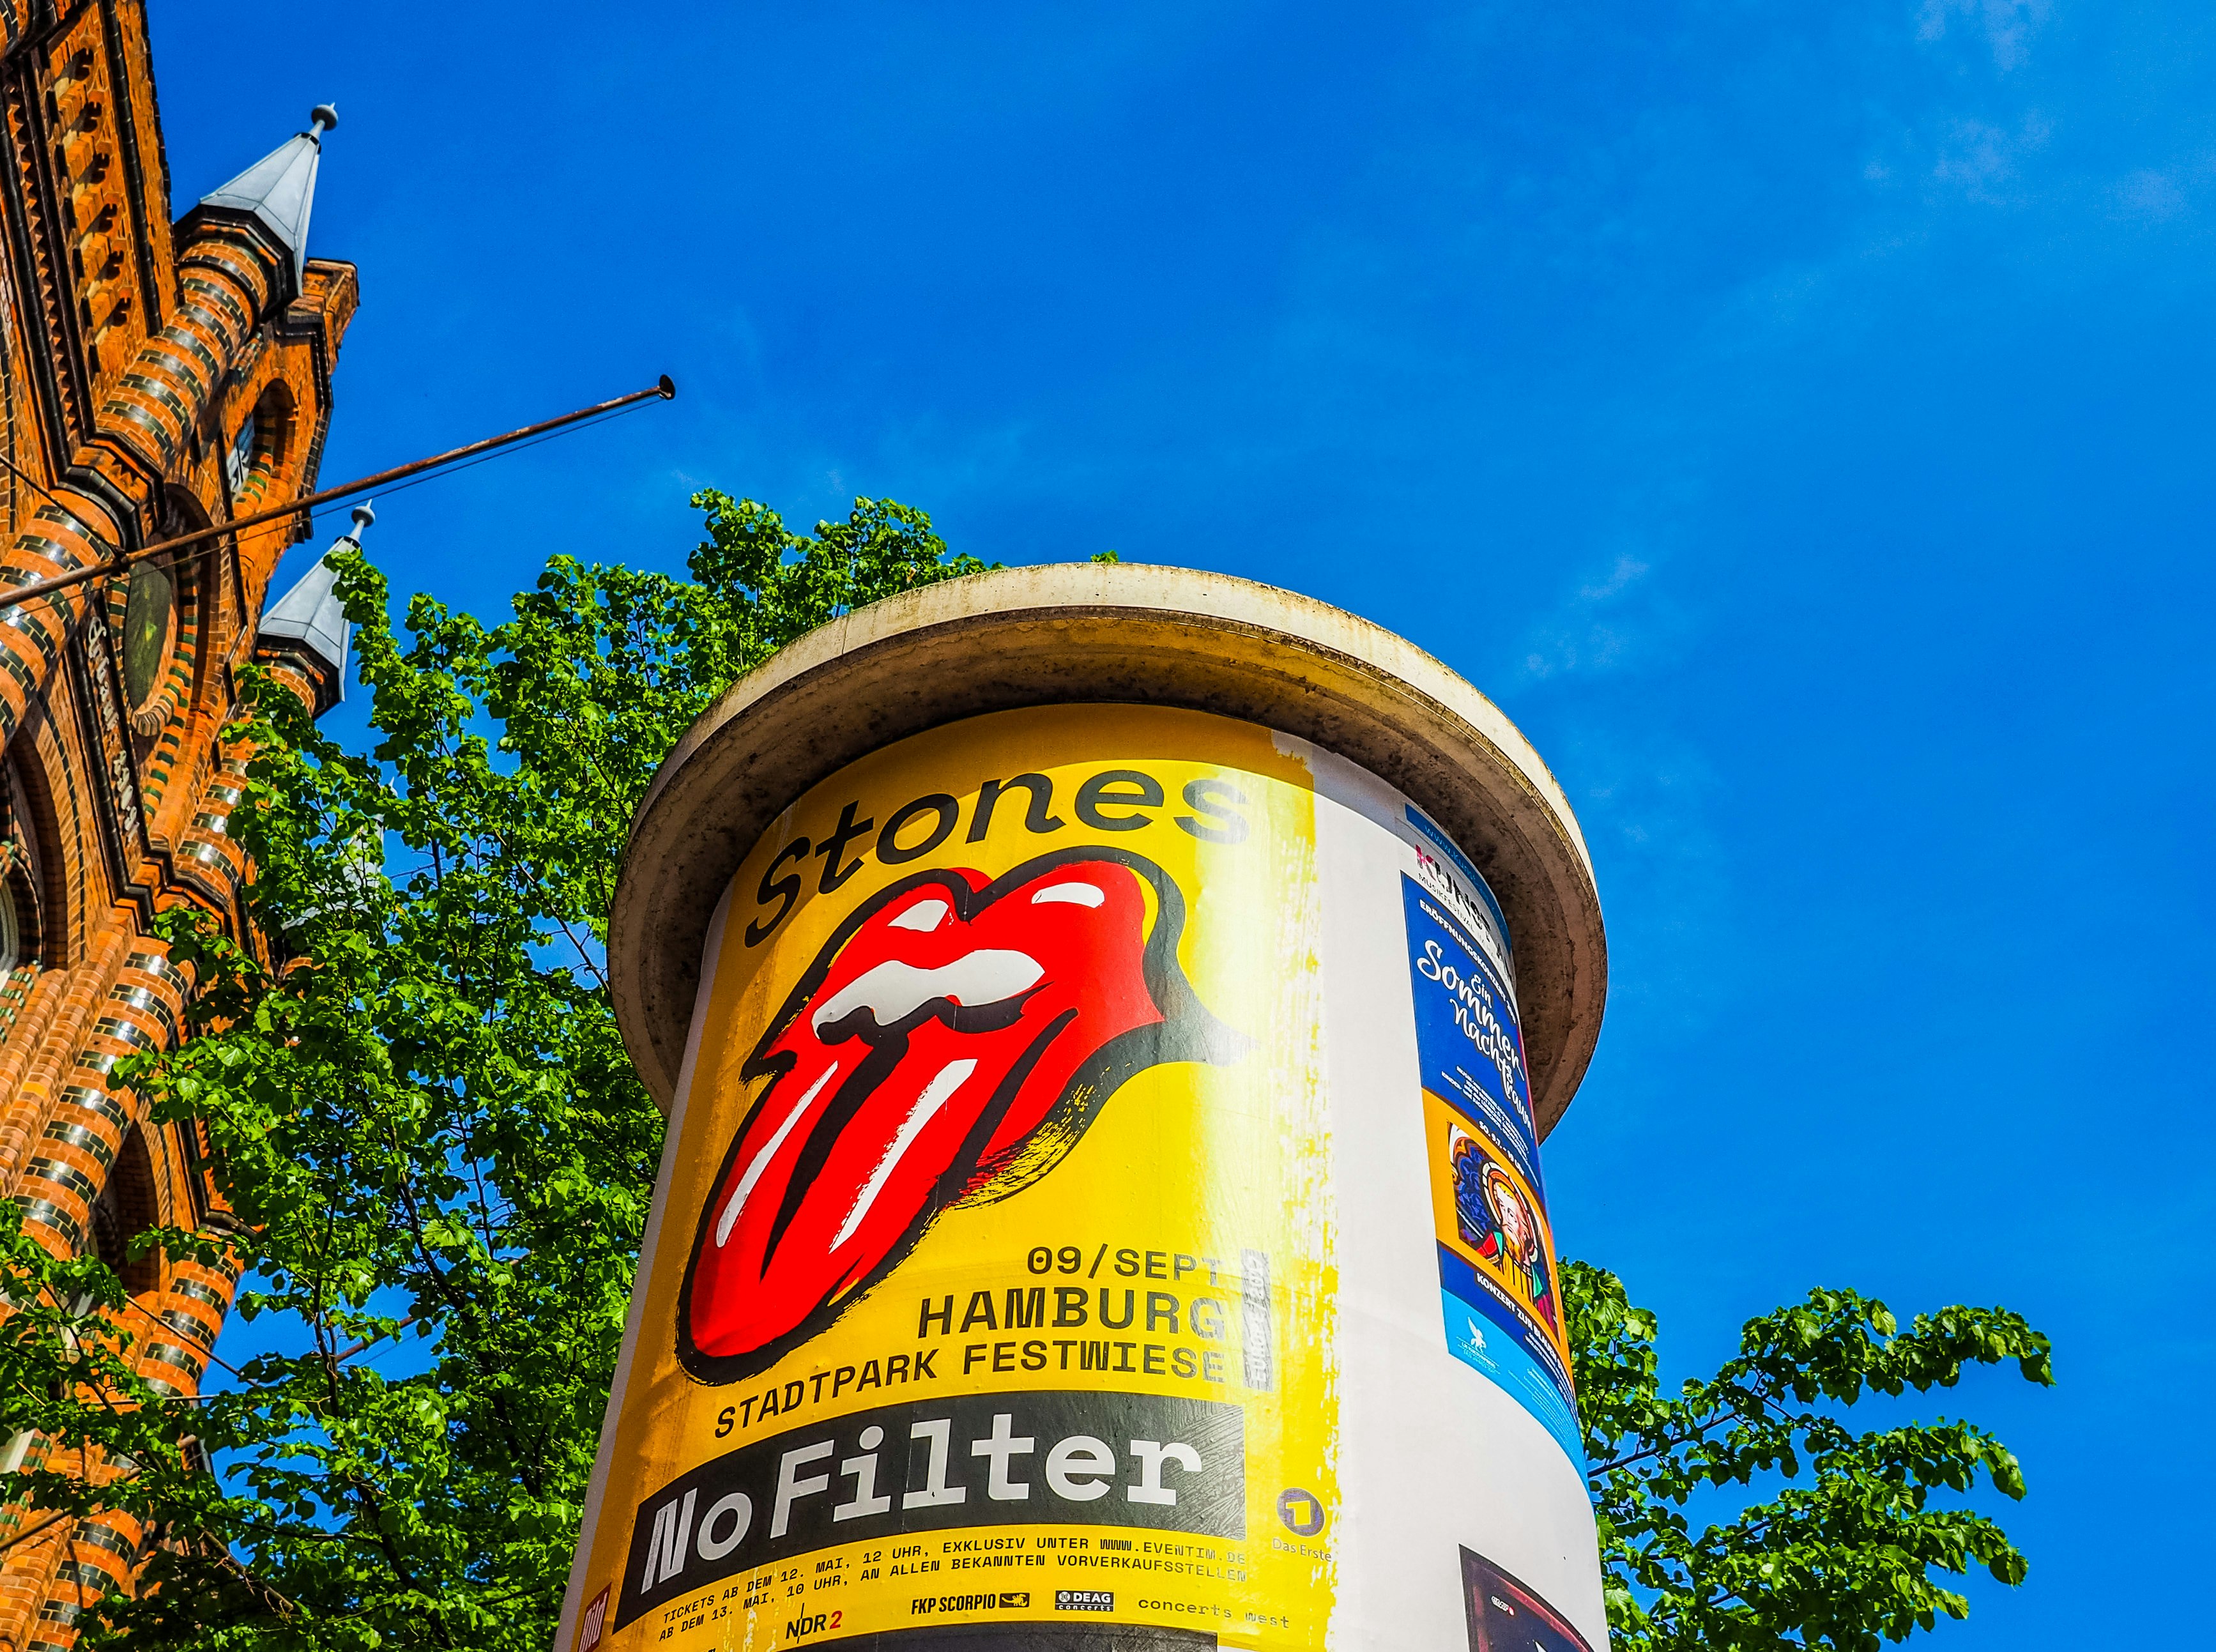 A water tower is emblazoned with a brightly colored tour poster for the Rolling Stones No Filter reunion